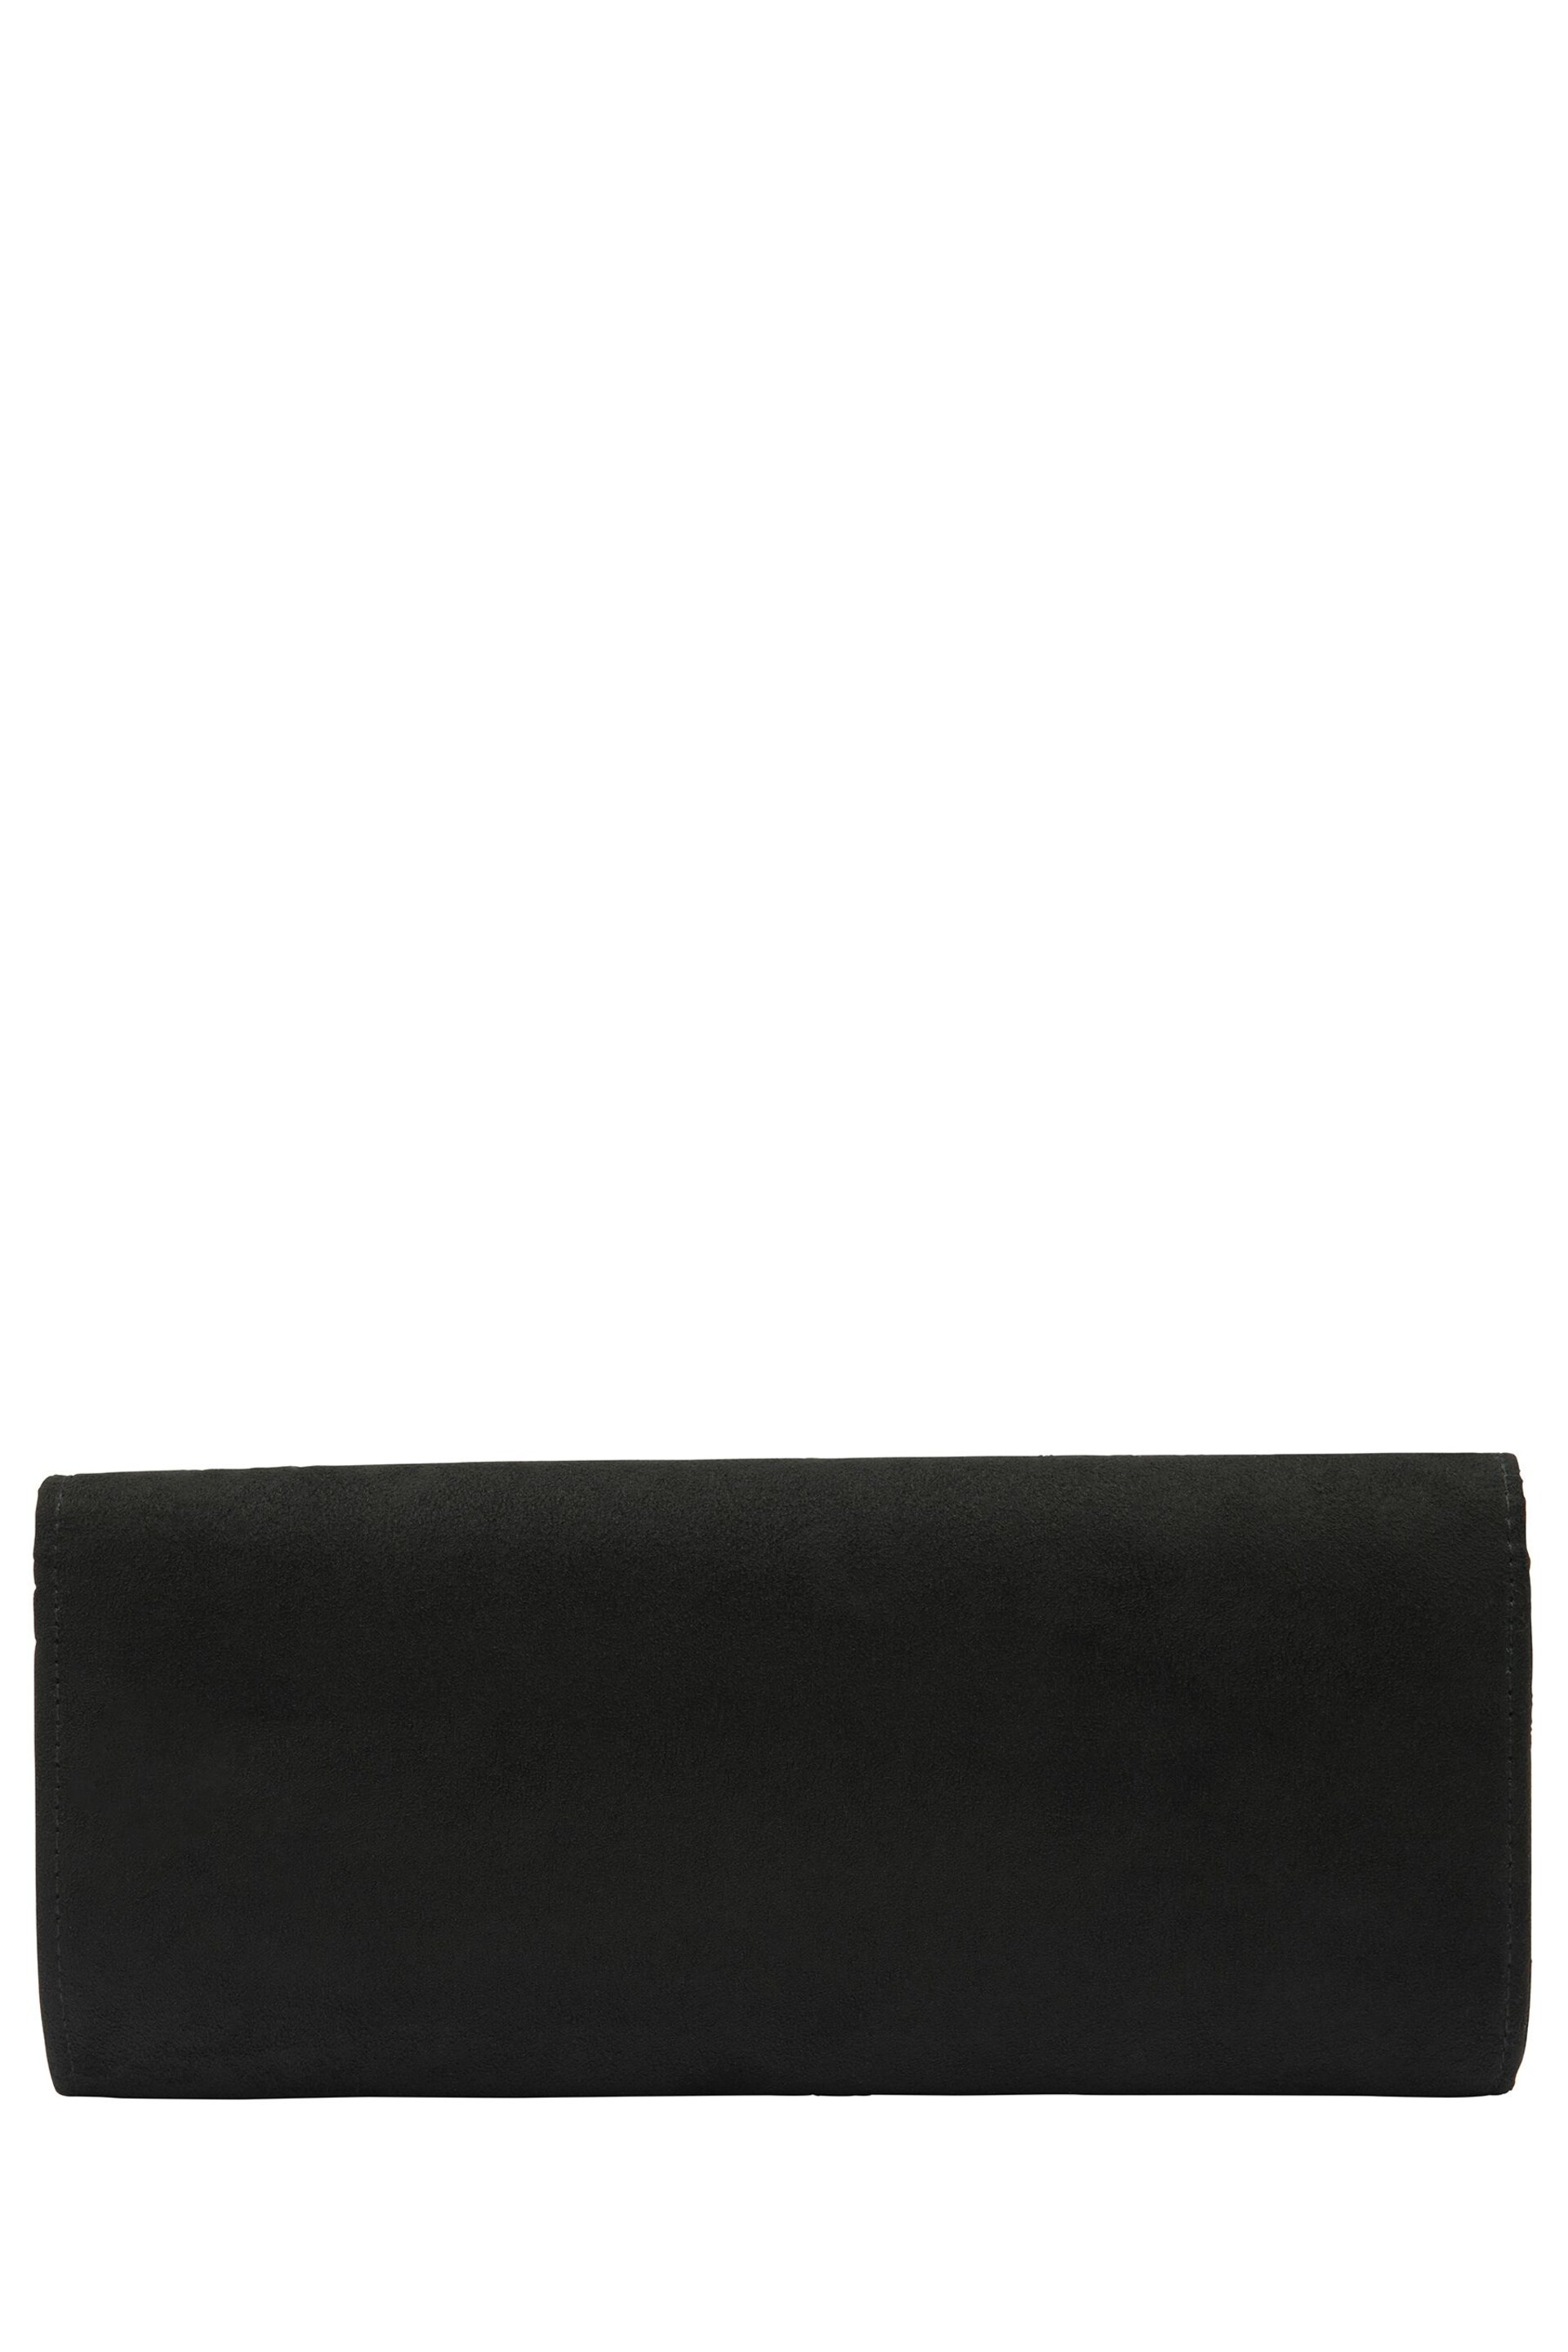 Lotus Black Clutch Bag with Chain - Image 2 of 4